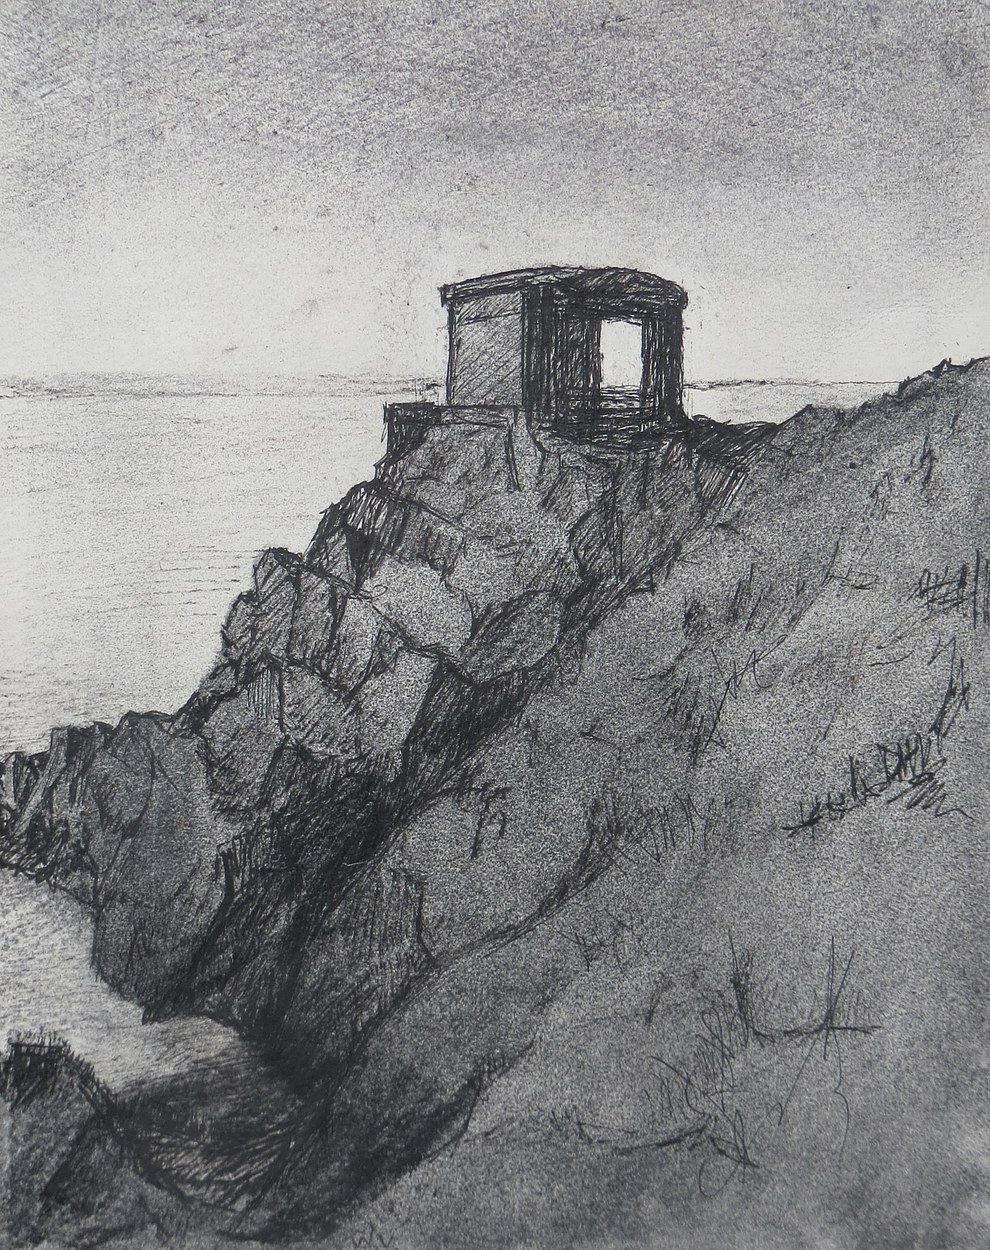 Brean Down, WW2 searchlight station, drypoint, image size 20 x 28cm., edition of 10, £150